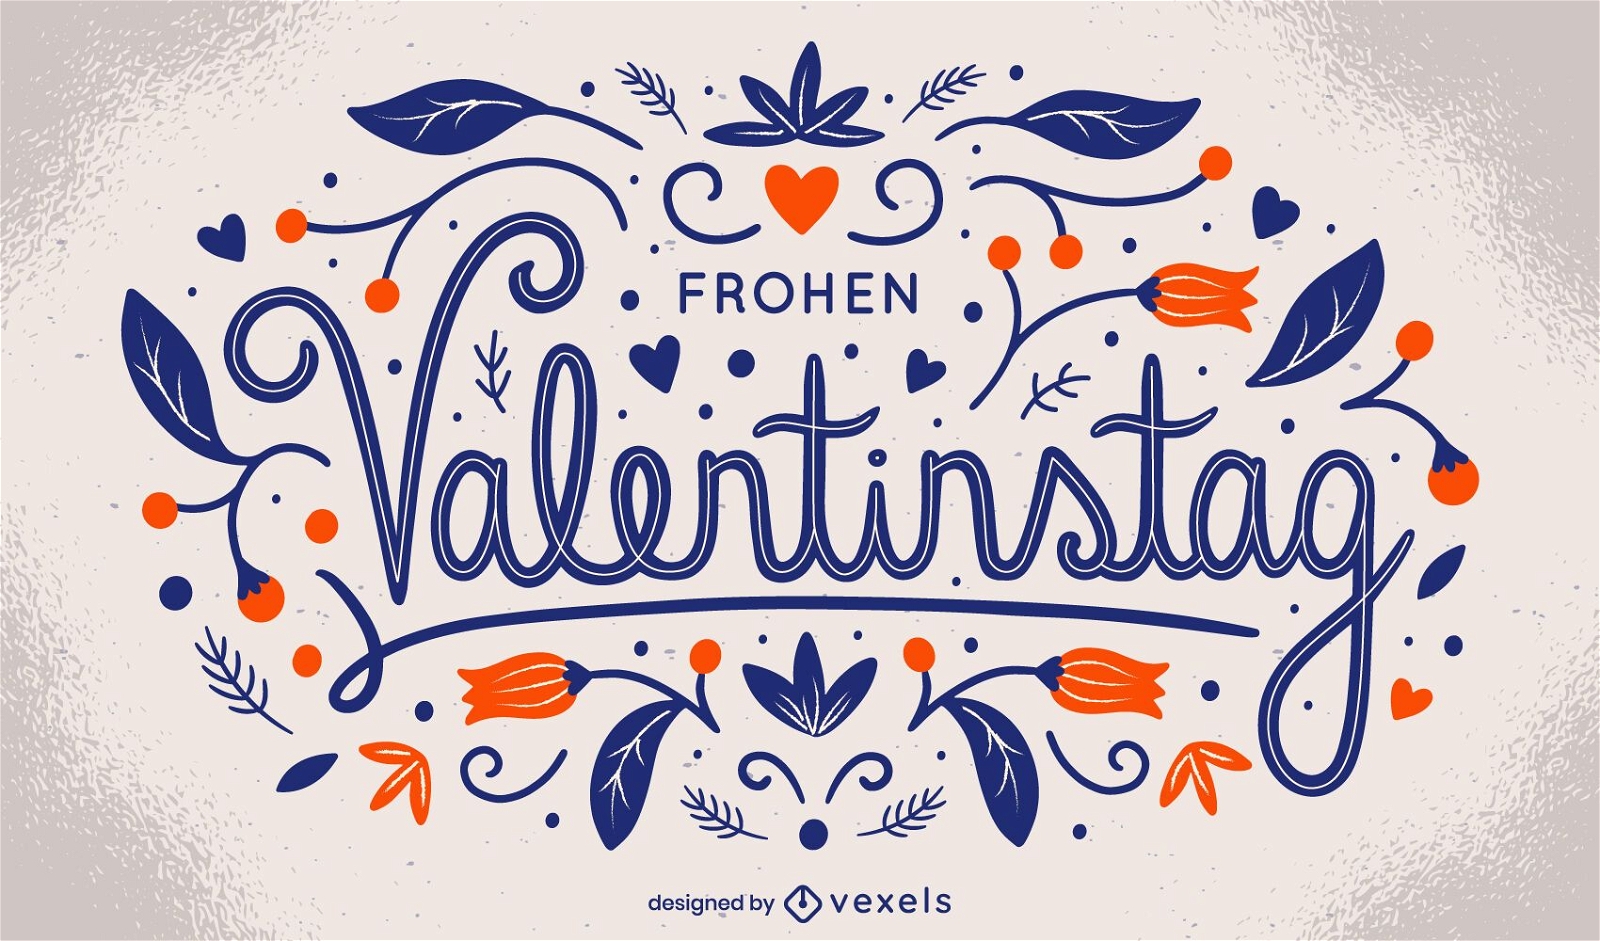 German valentine's day lettering quote